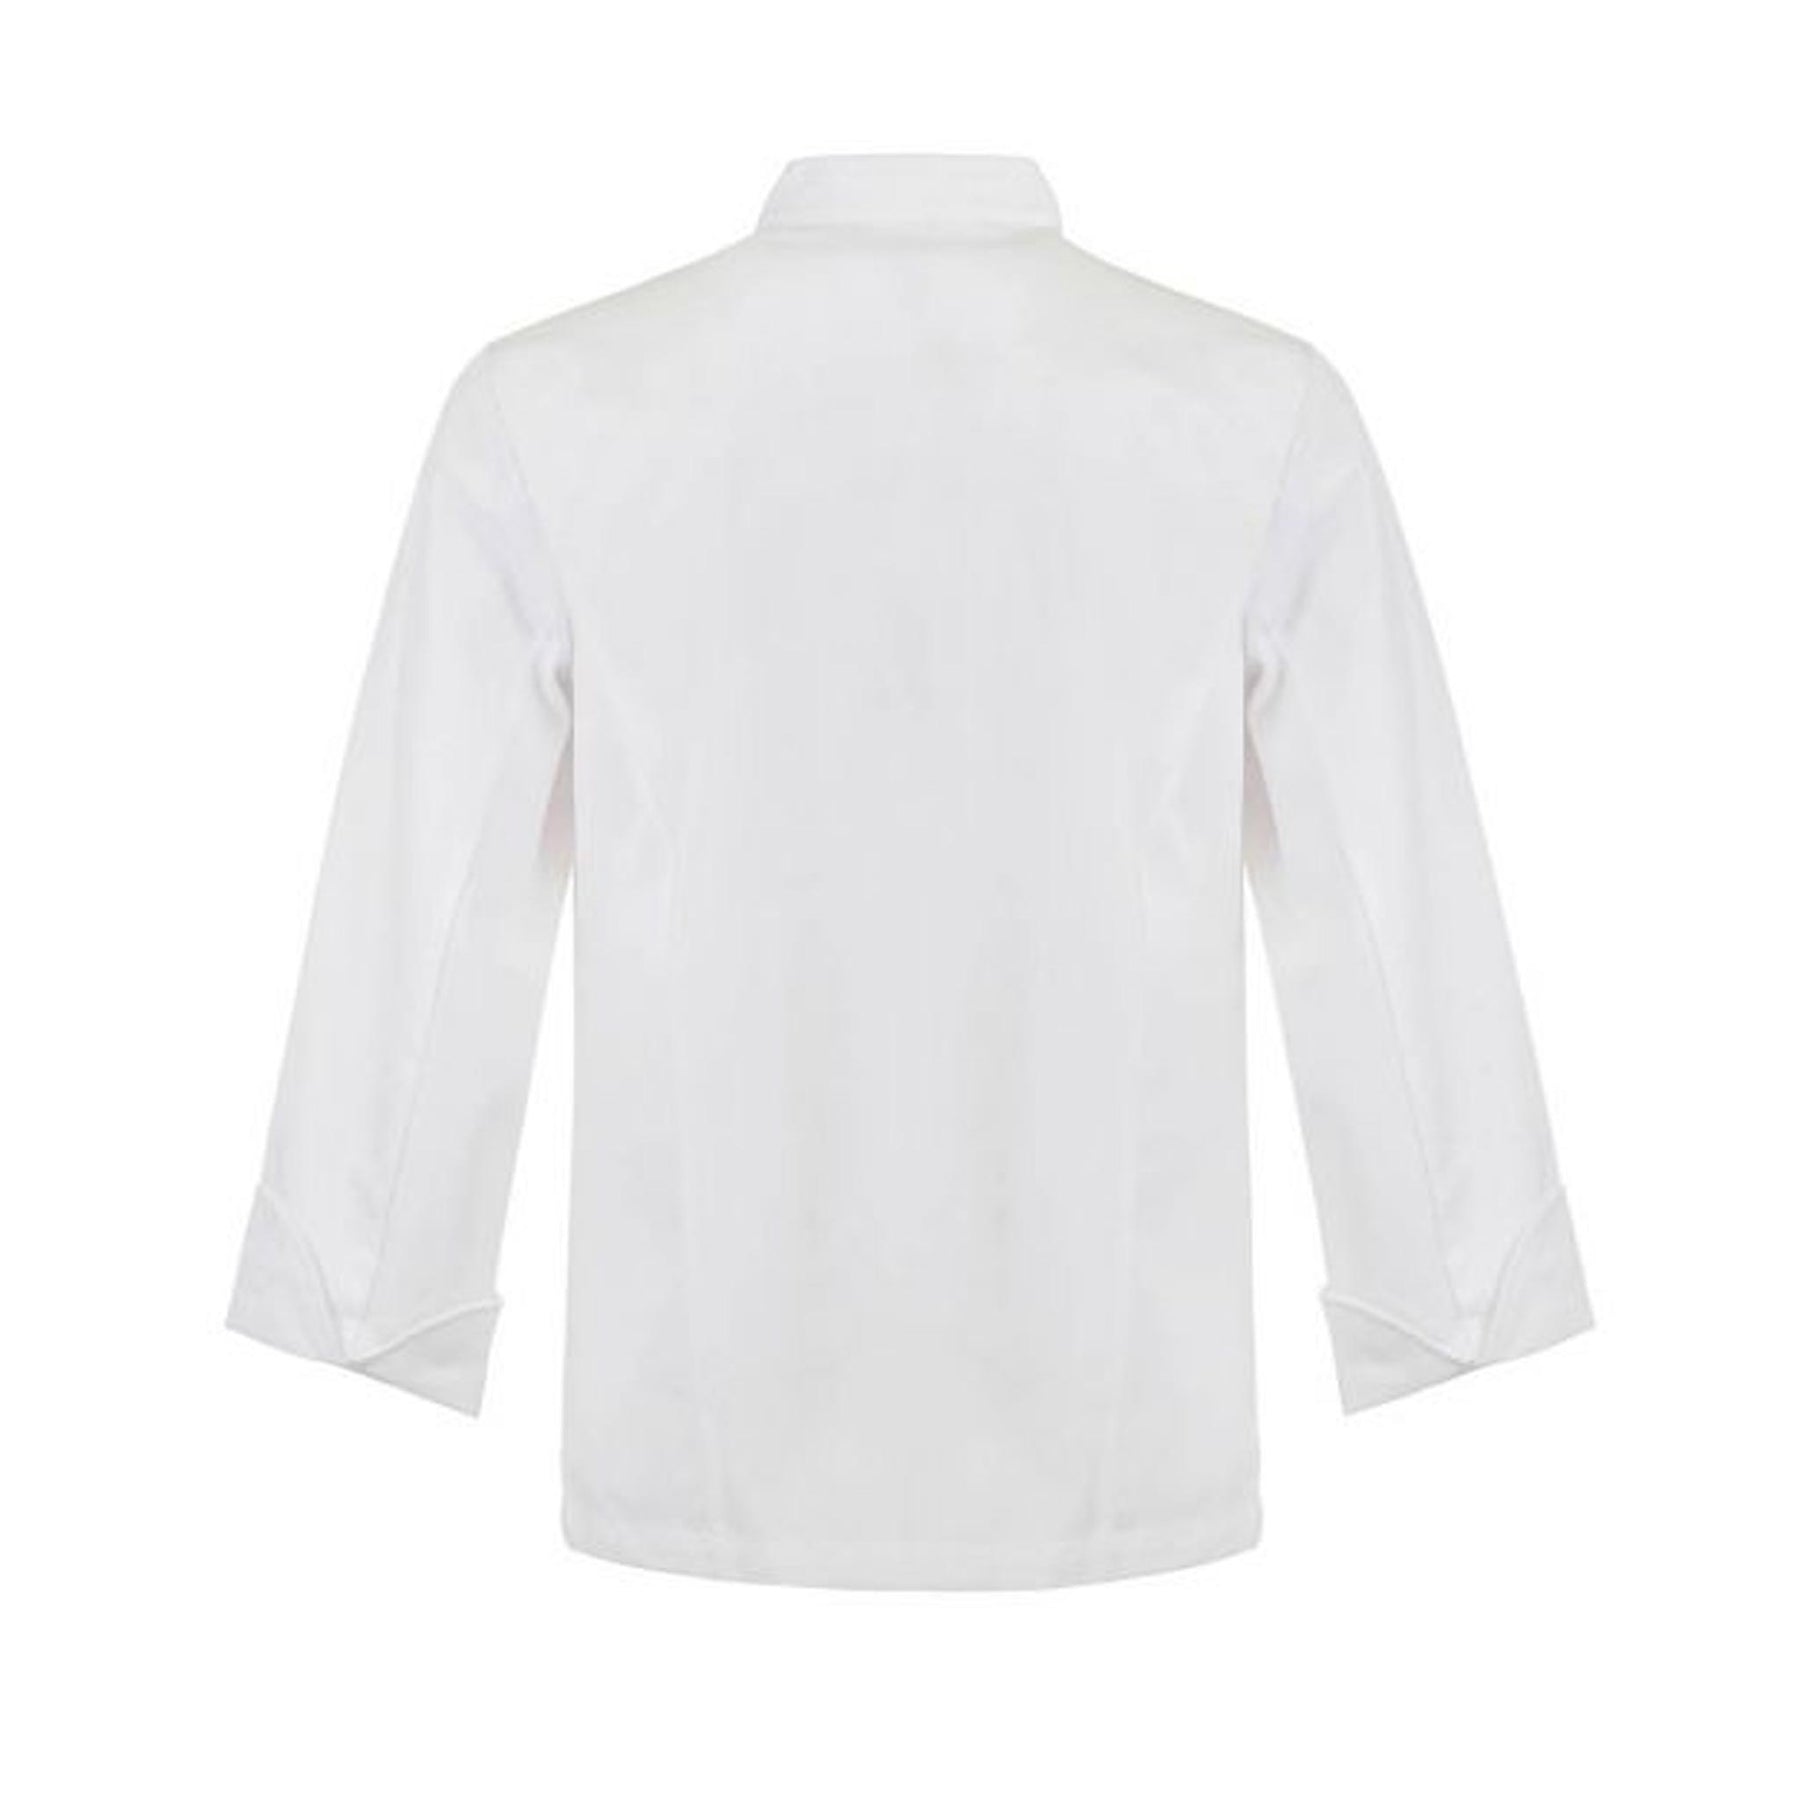 white long sleeve executive chefs jacket with press studs back view